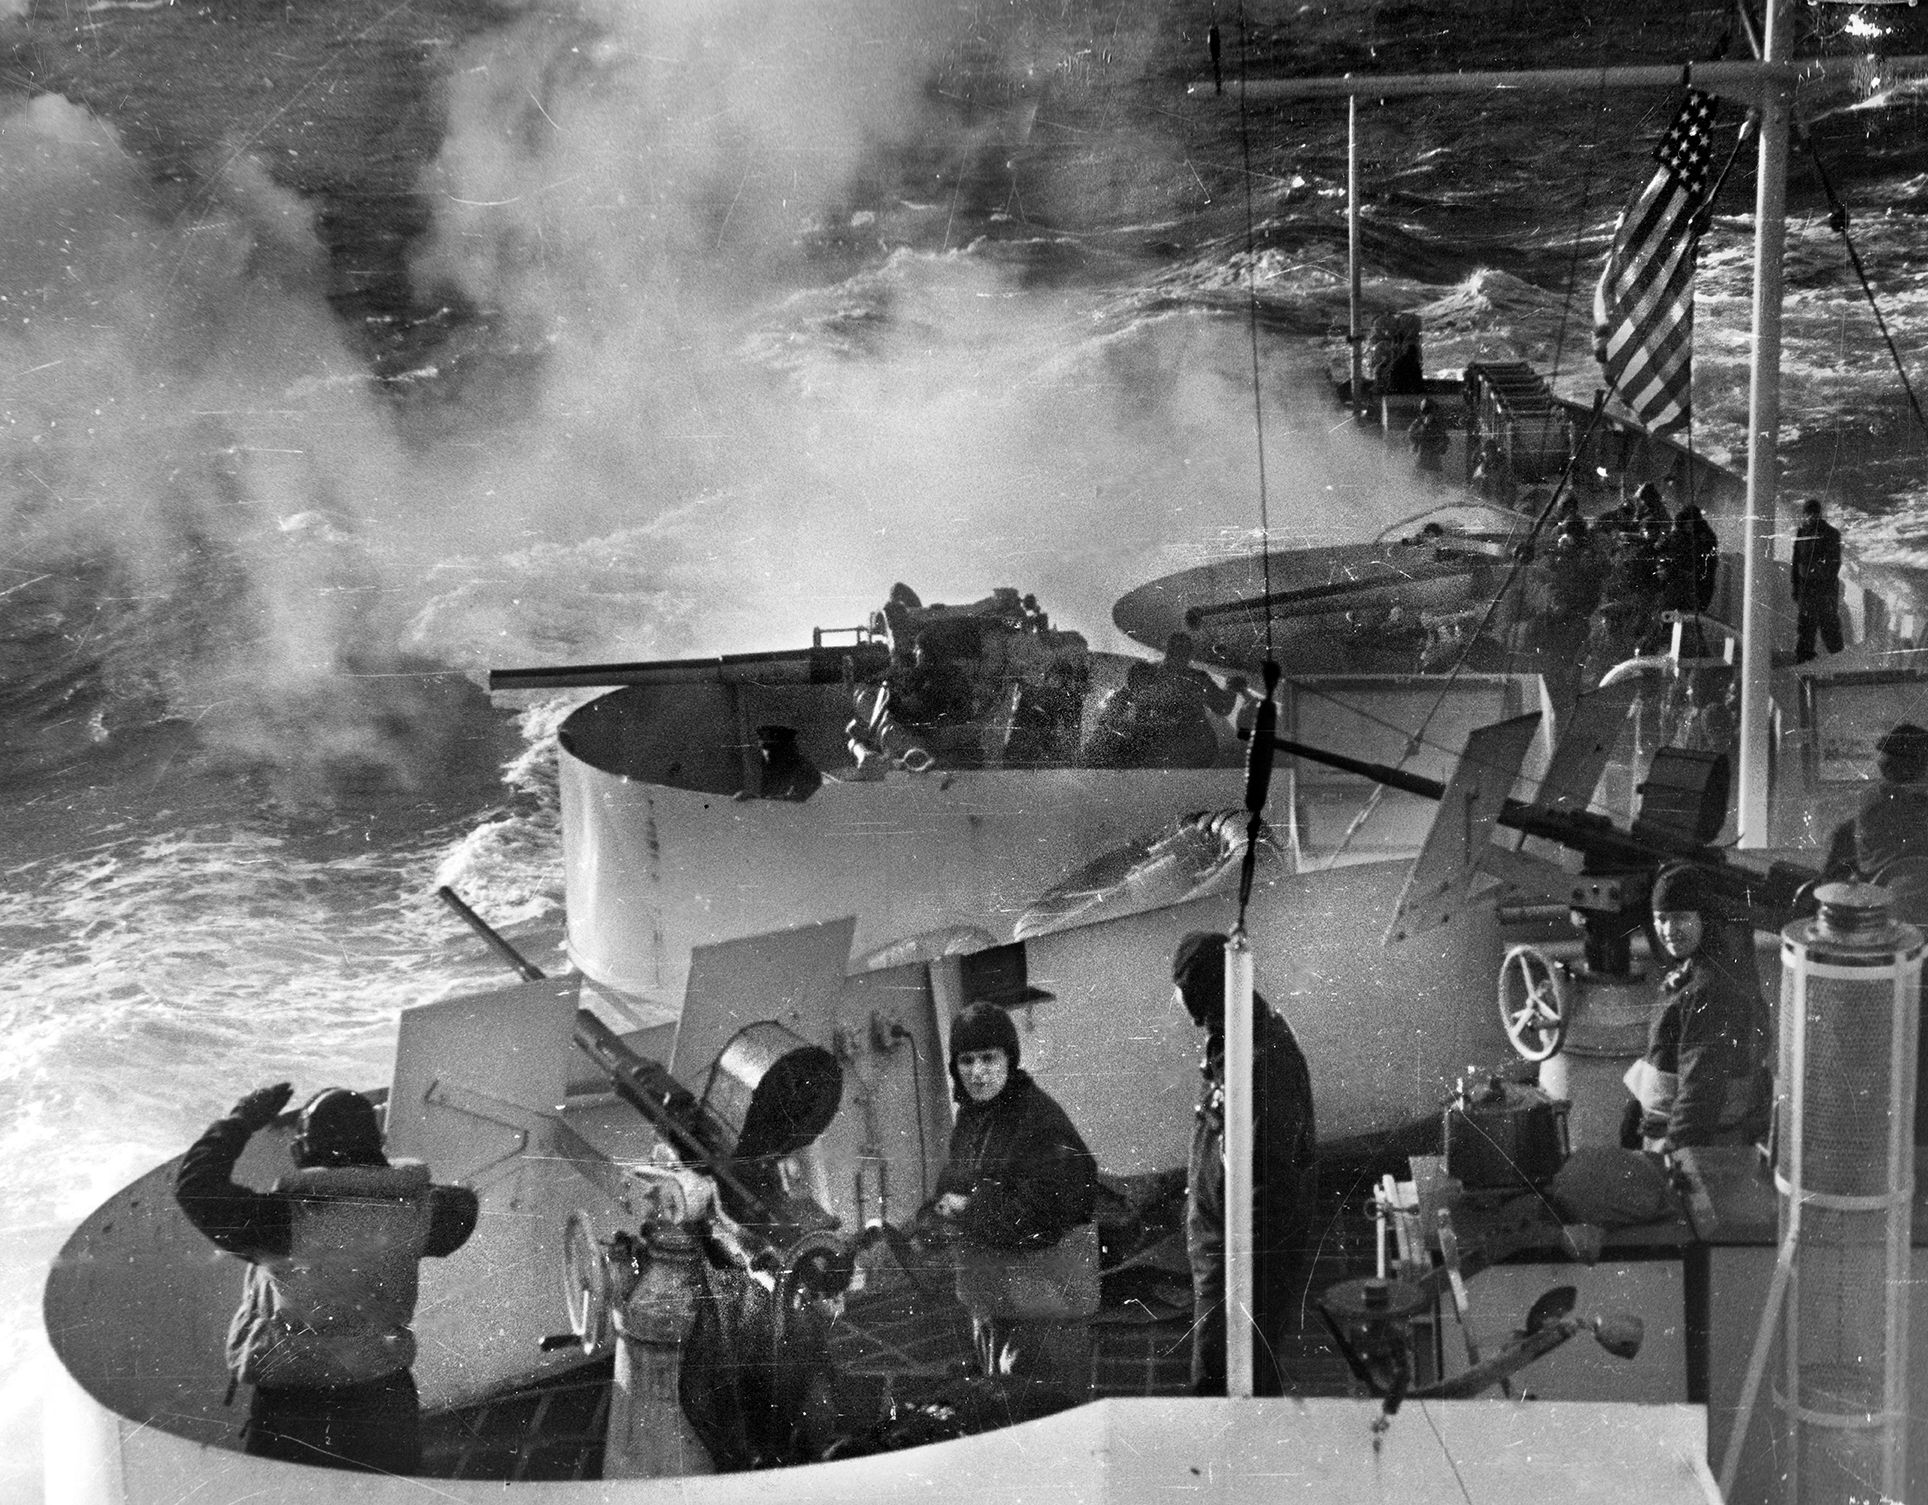 Manning their battle stations during an exercise, Coast Guardsmen aboard a cutter at sea await orders to open fire with their guns.